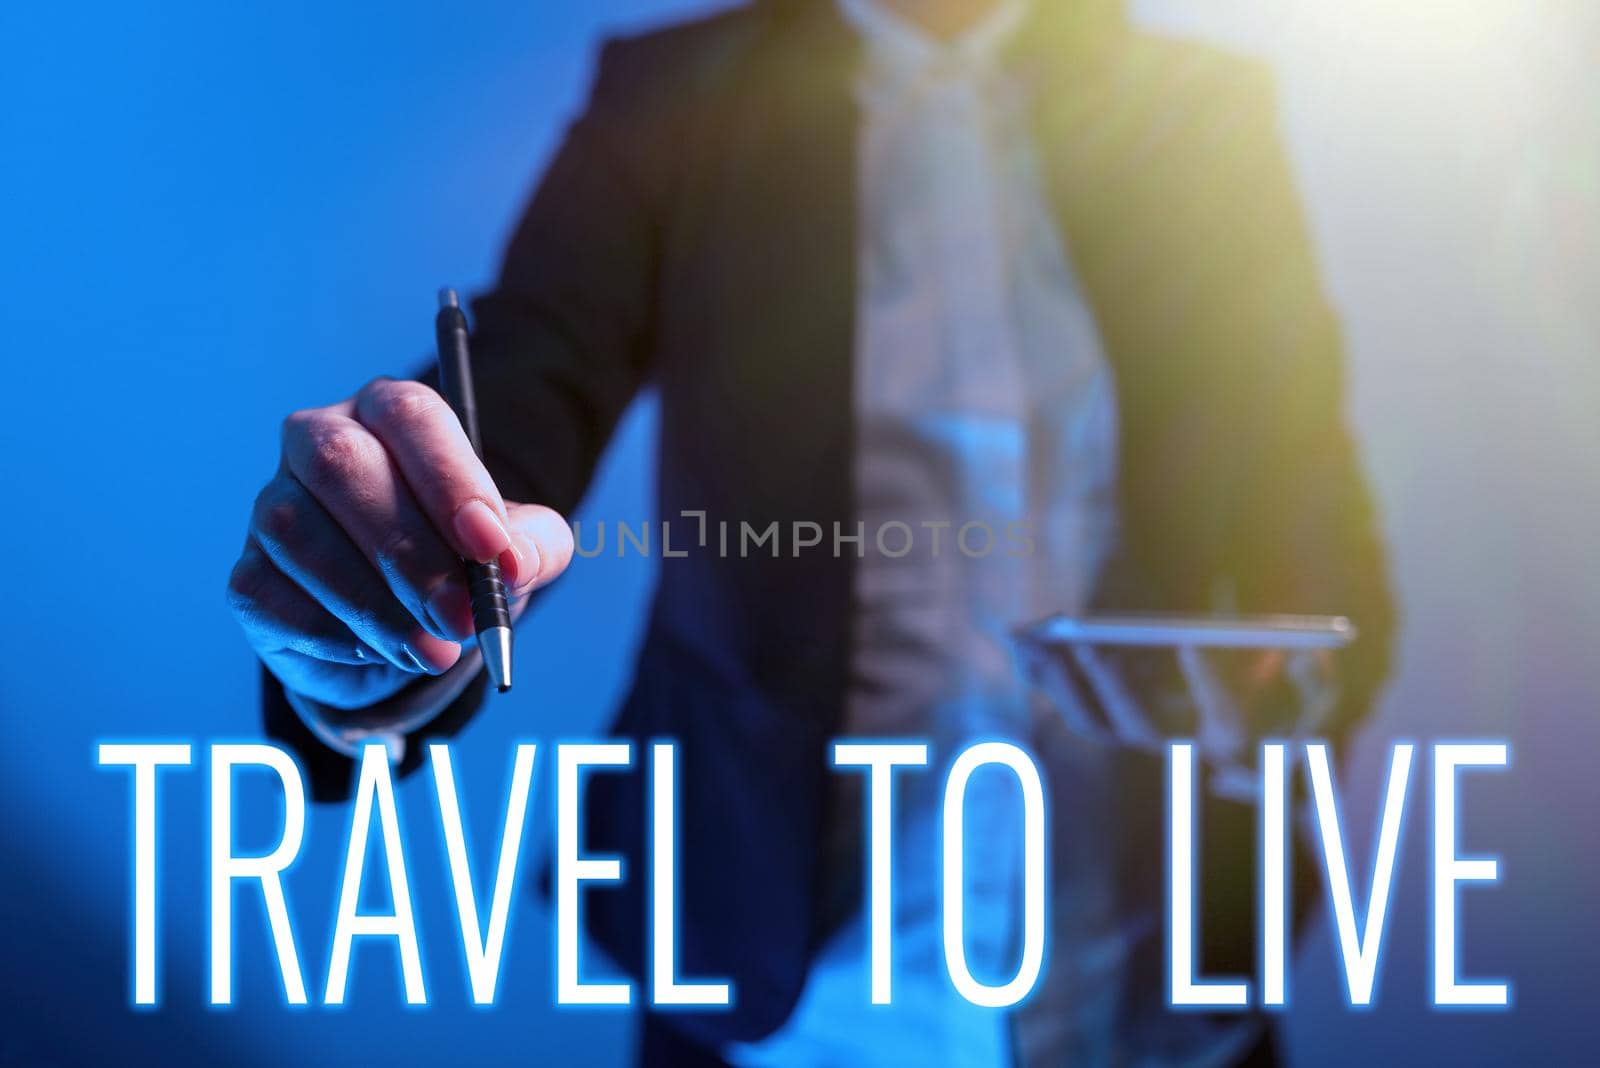 Hand writing sign Travel To Live, Word for Get knowledge and exciting adventures by going on trips Businessman With Tablet Pointing Digital S In Pattern And Information.